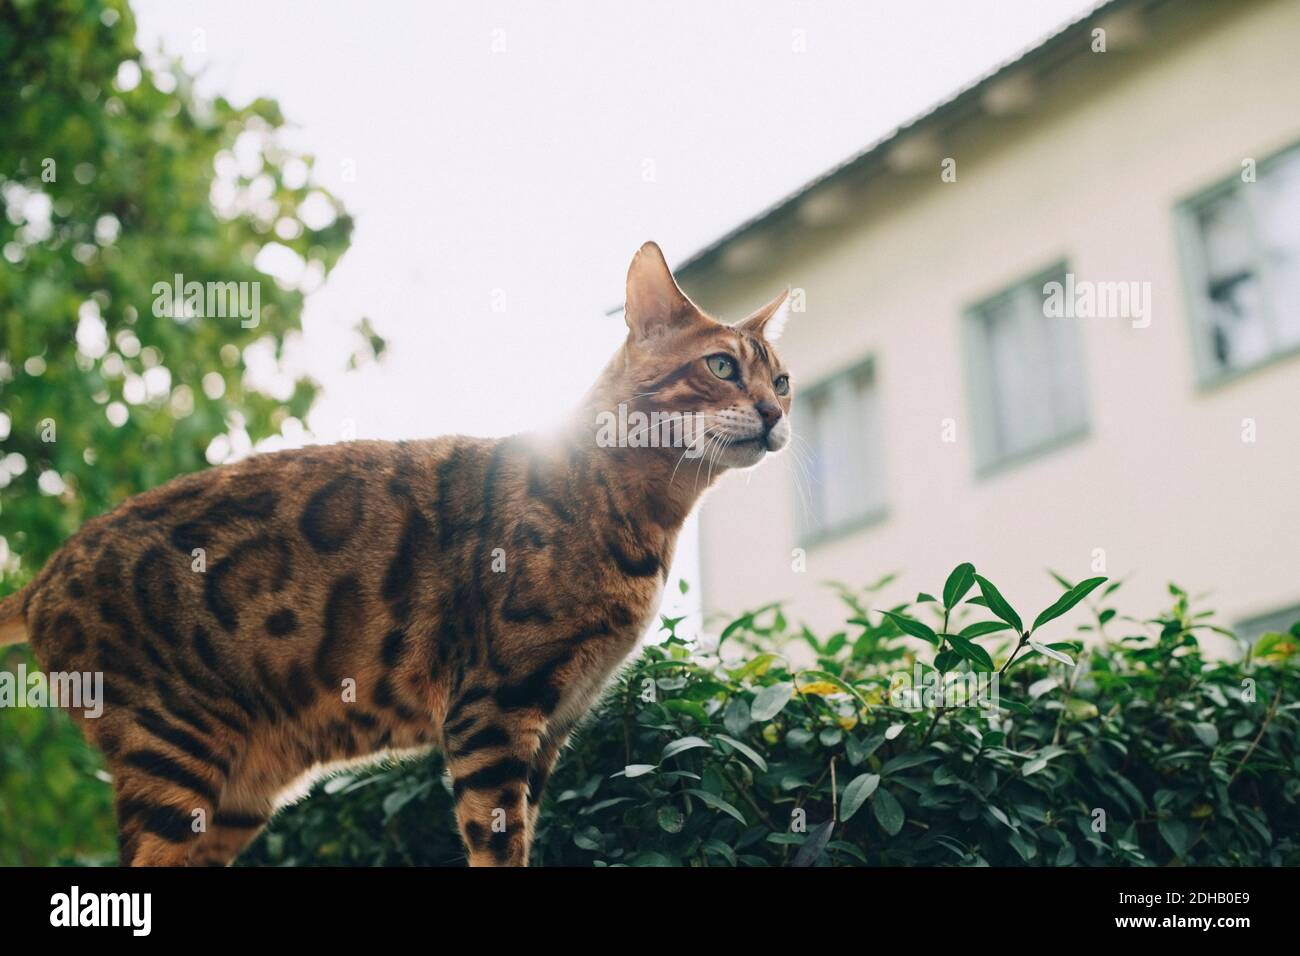 Low angle view of cat standing by plants on sunny day Stock Photo